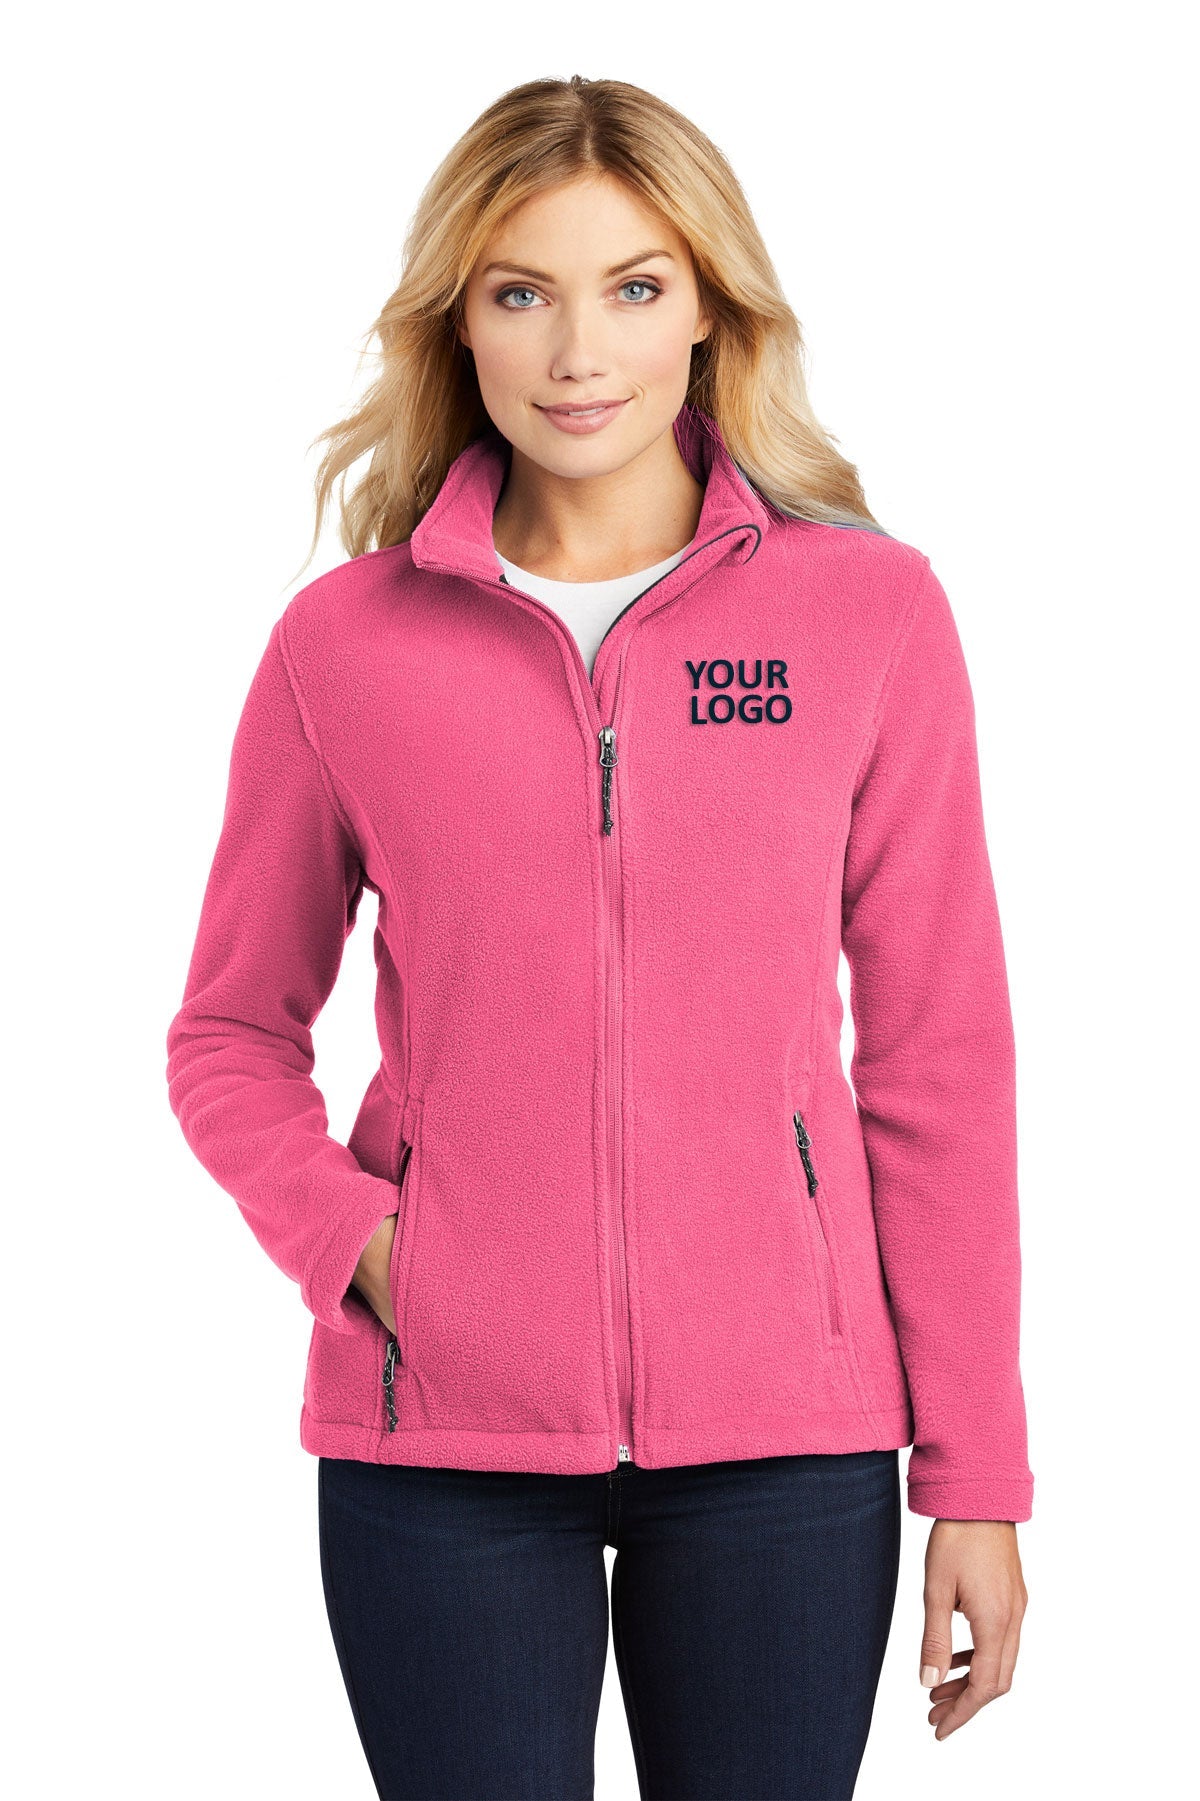 port authority pink blossom l217 business logo jackets